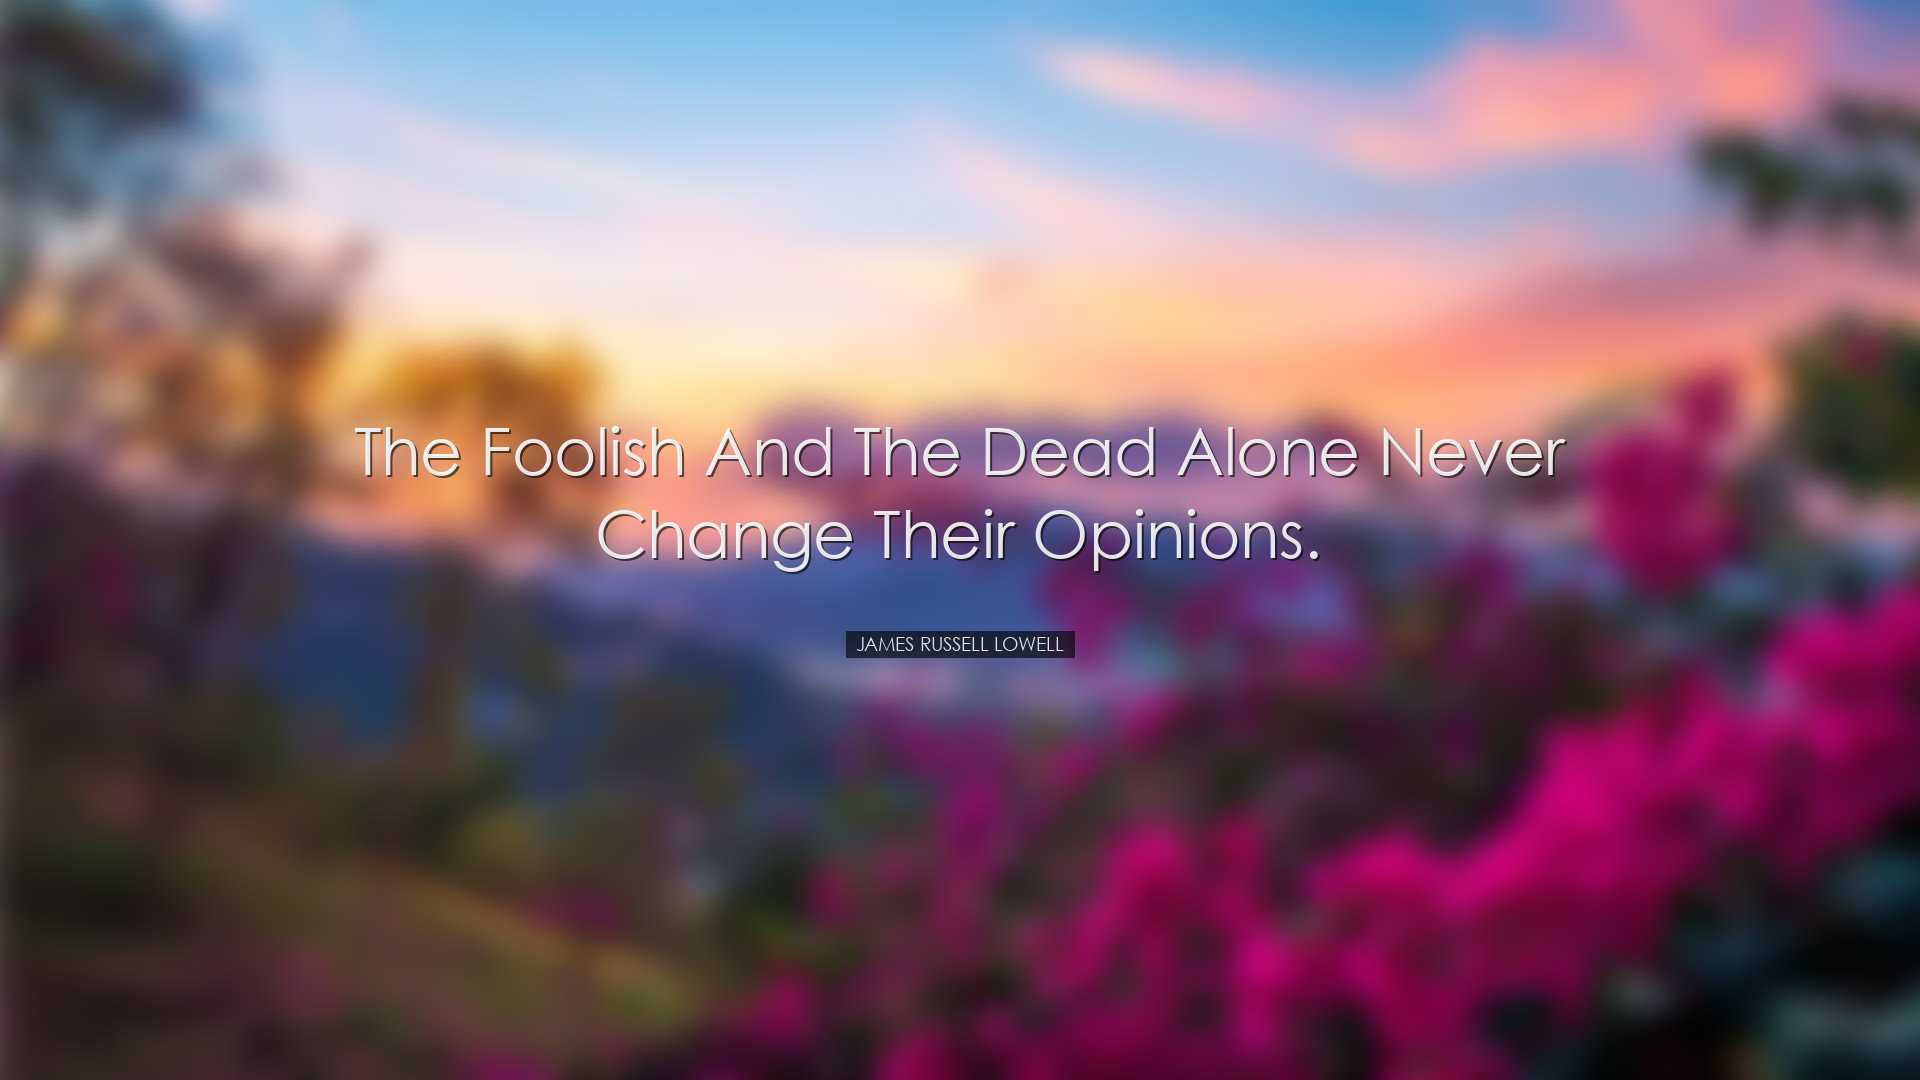 The foolish and the dead alone never change their opinions. - Jame